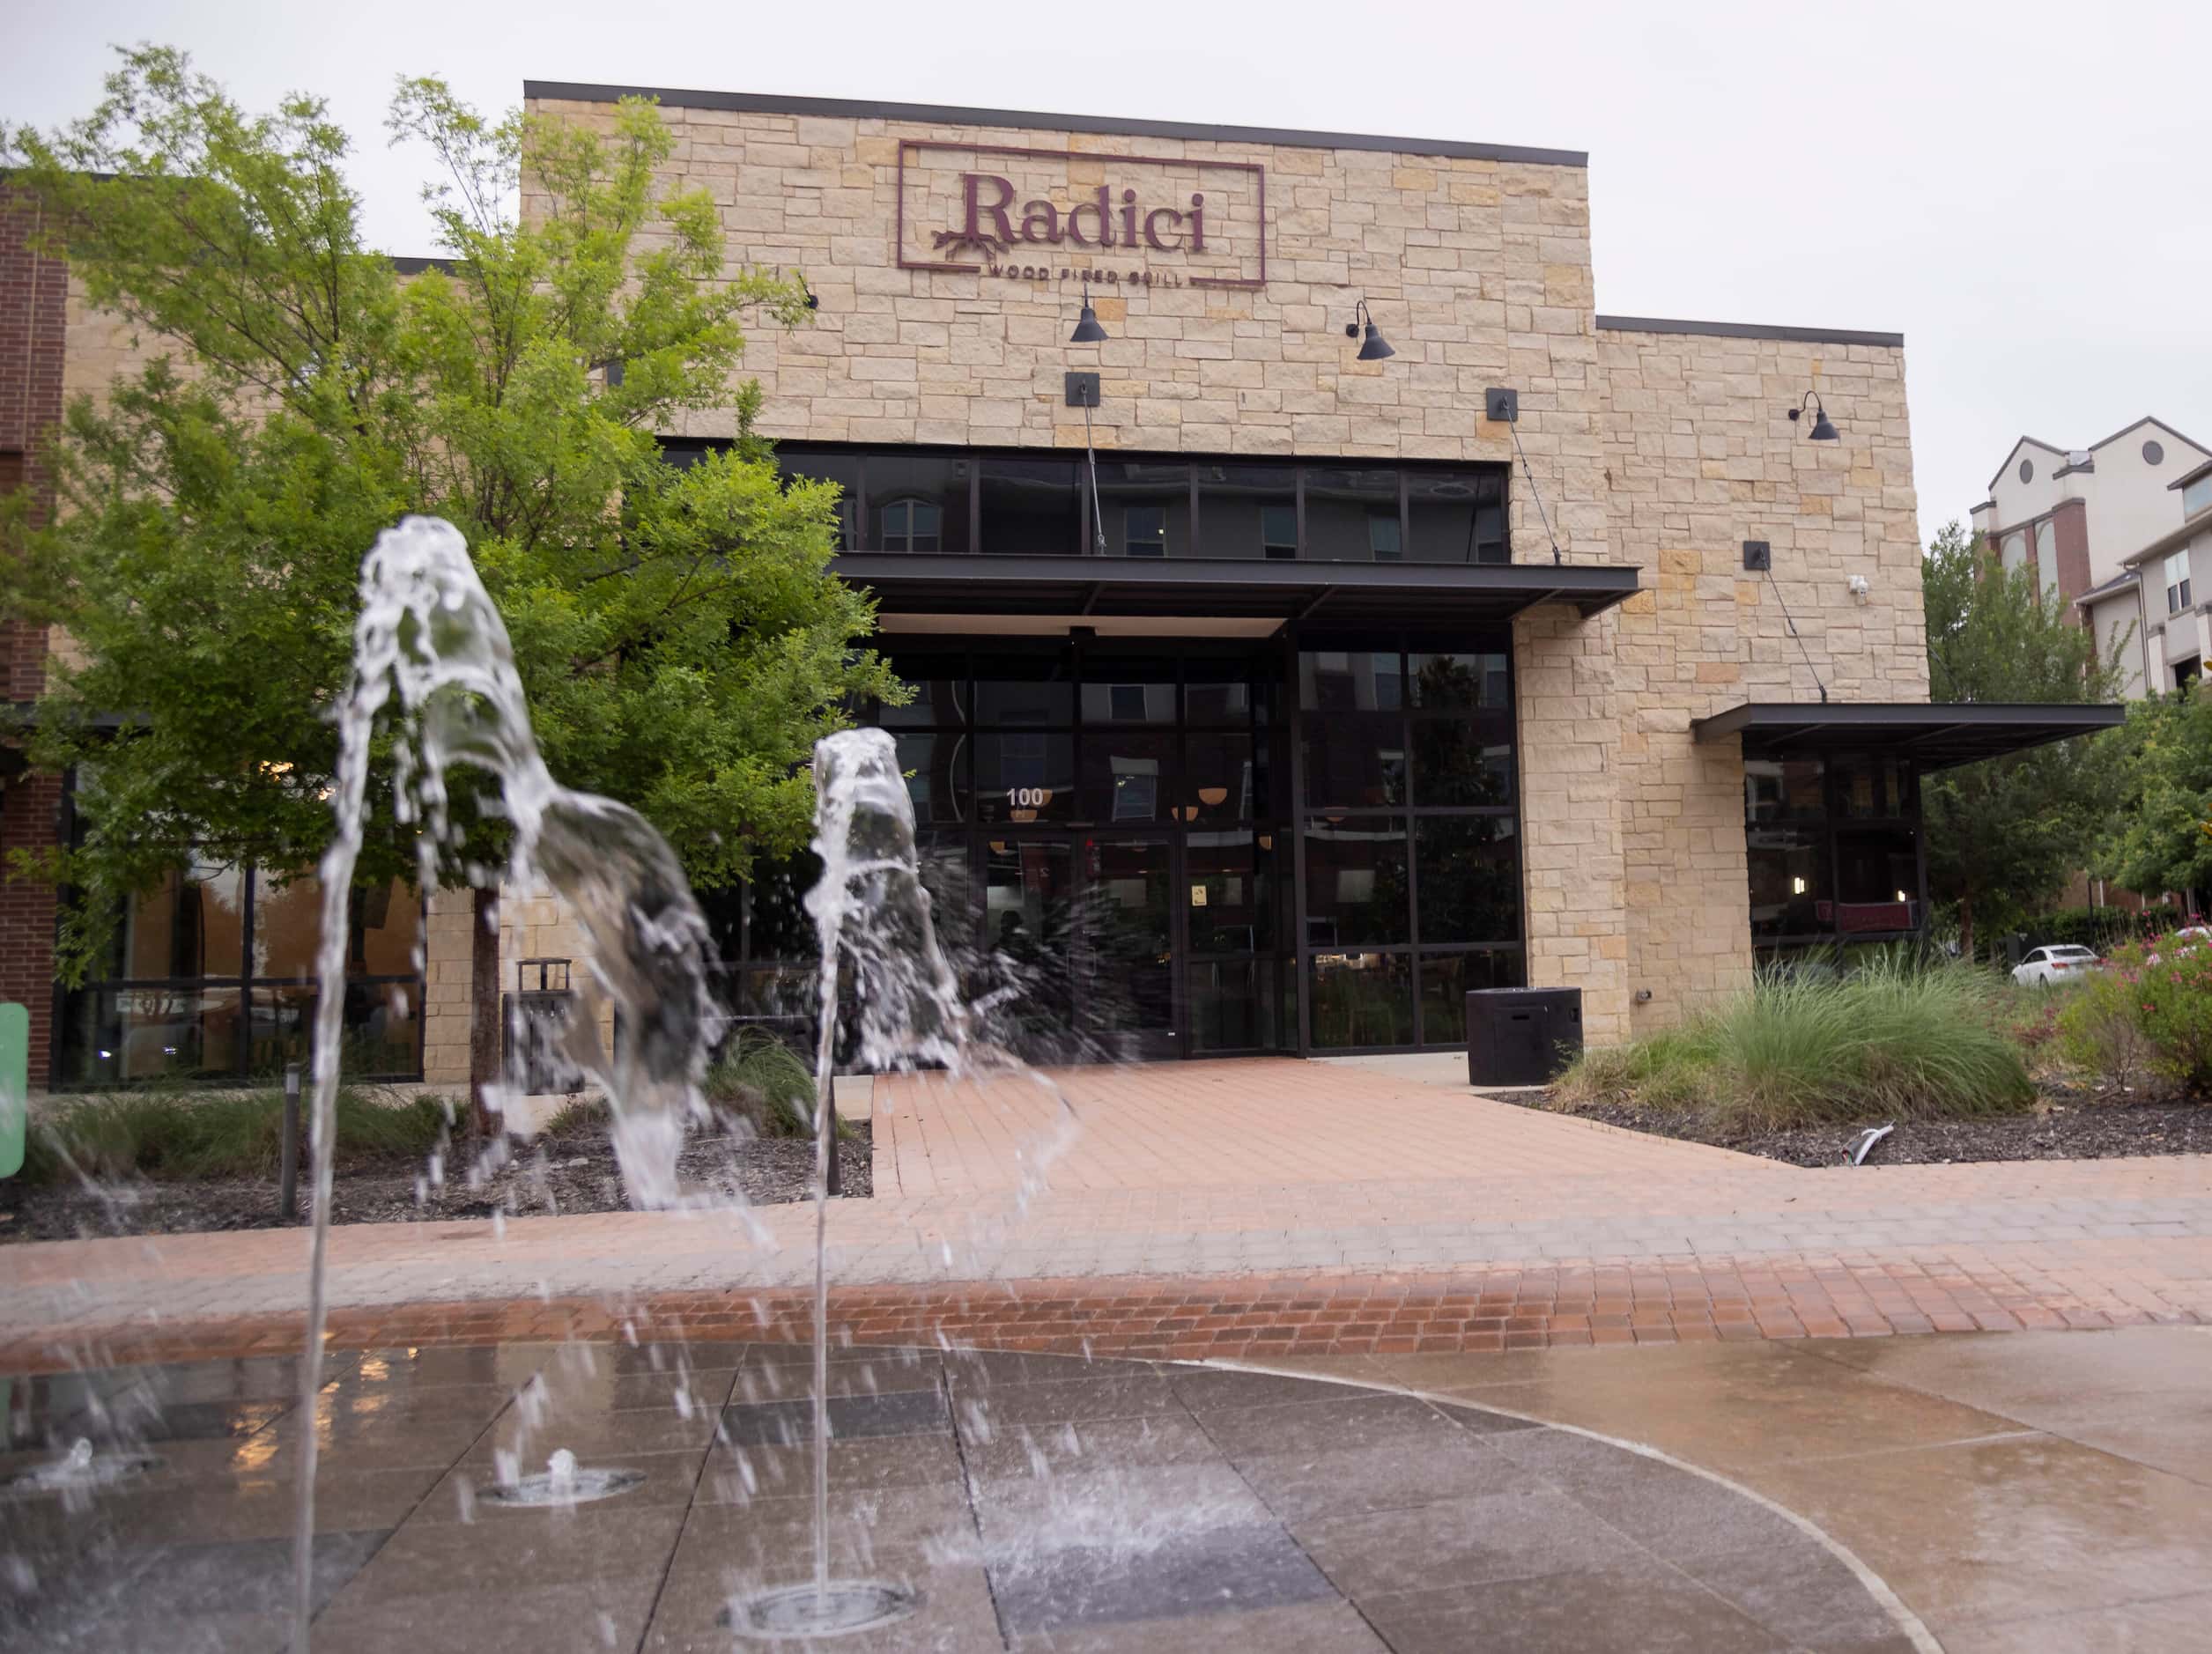 Radici is now the second restaurant Derry has opened in Farmers Branch with her business...